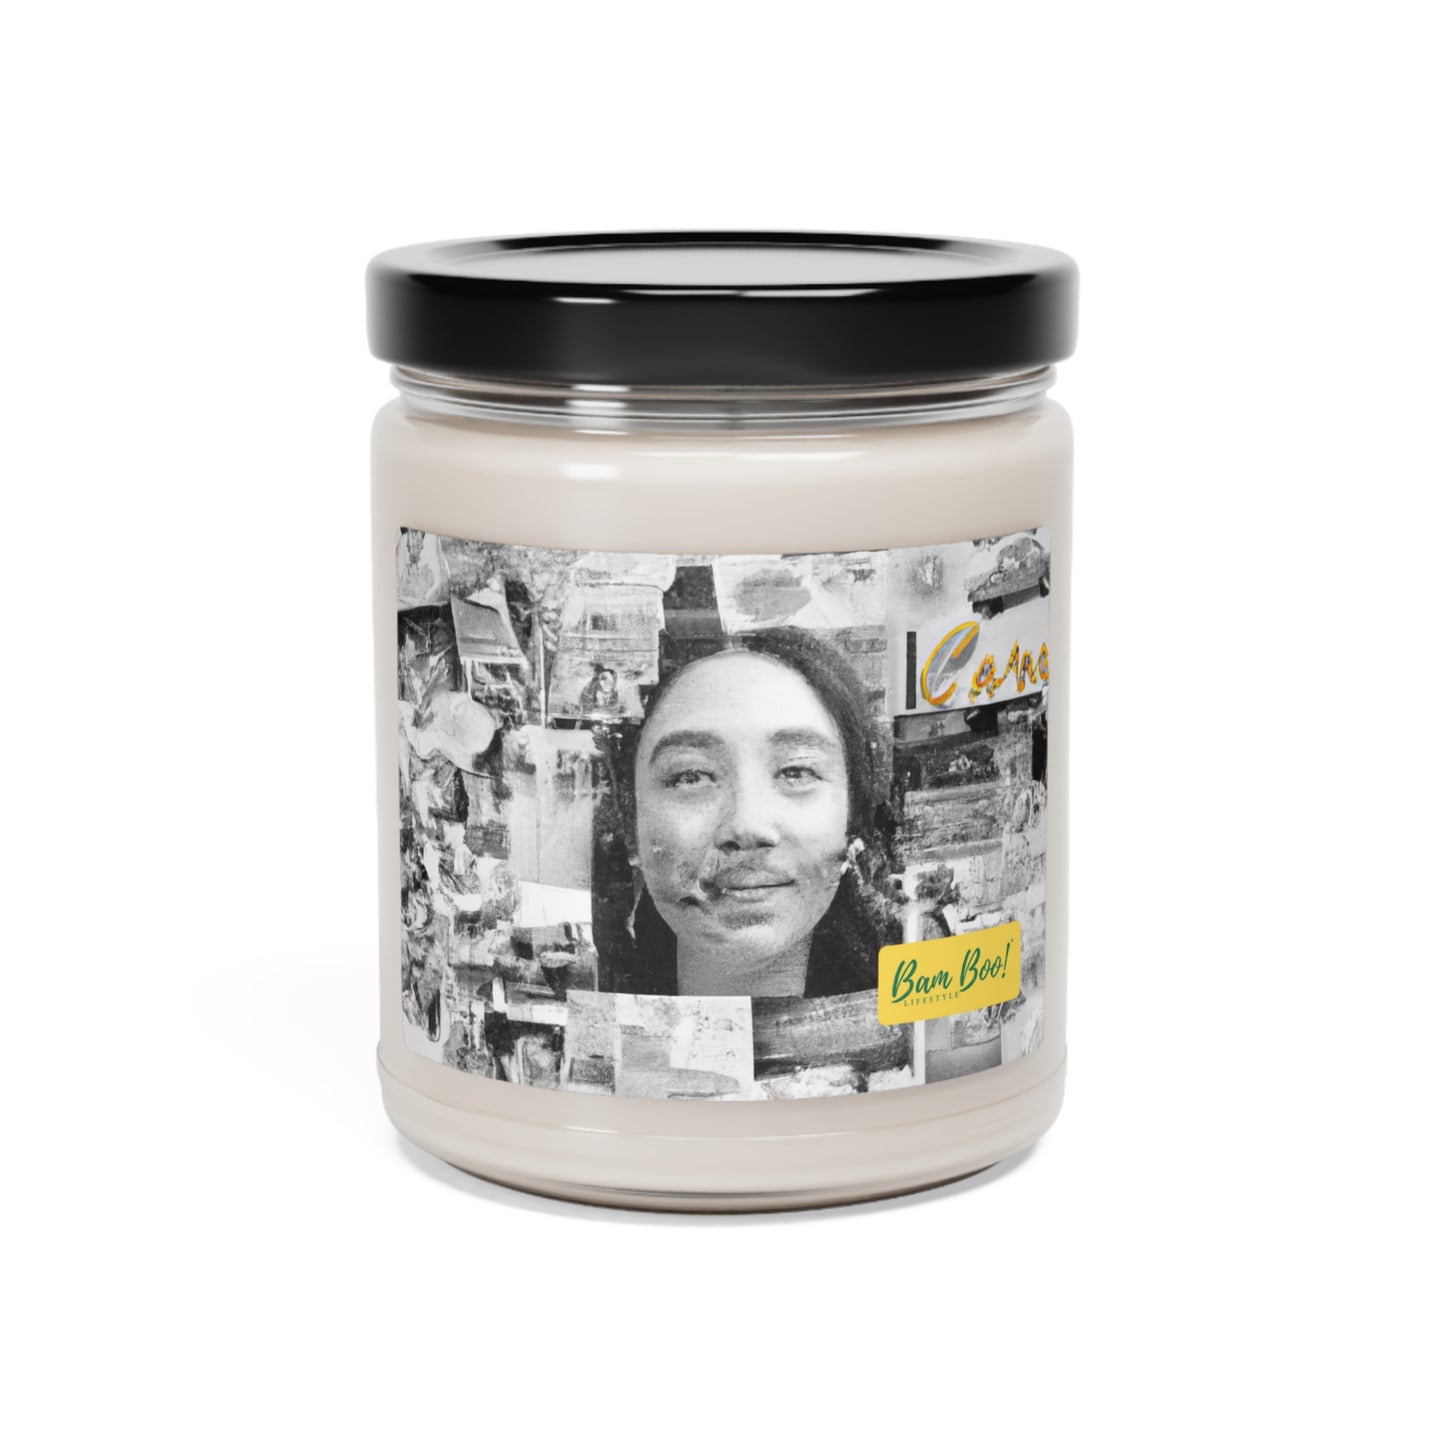 "My Life in Pictures: A Collage of My Favorite Memories" - Bam Boo! Lifestyle Eco-friendly Soy Candle